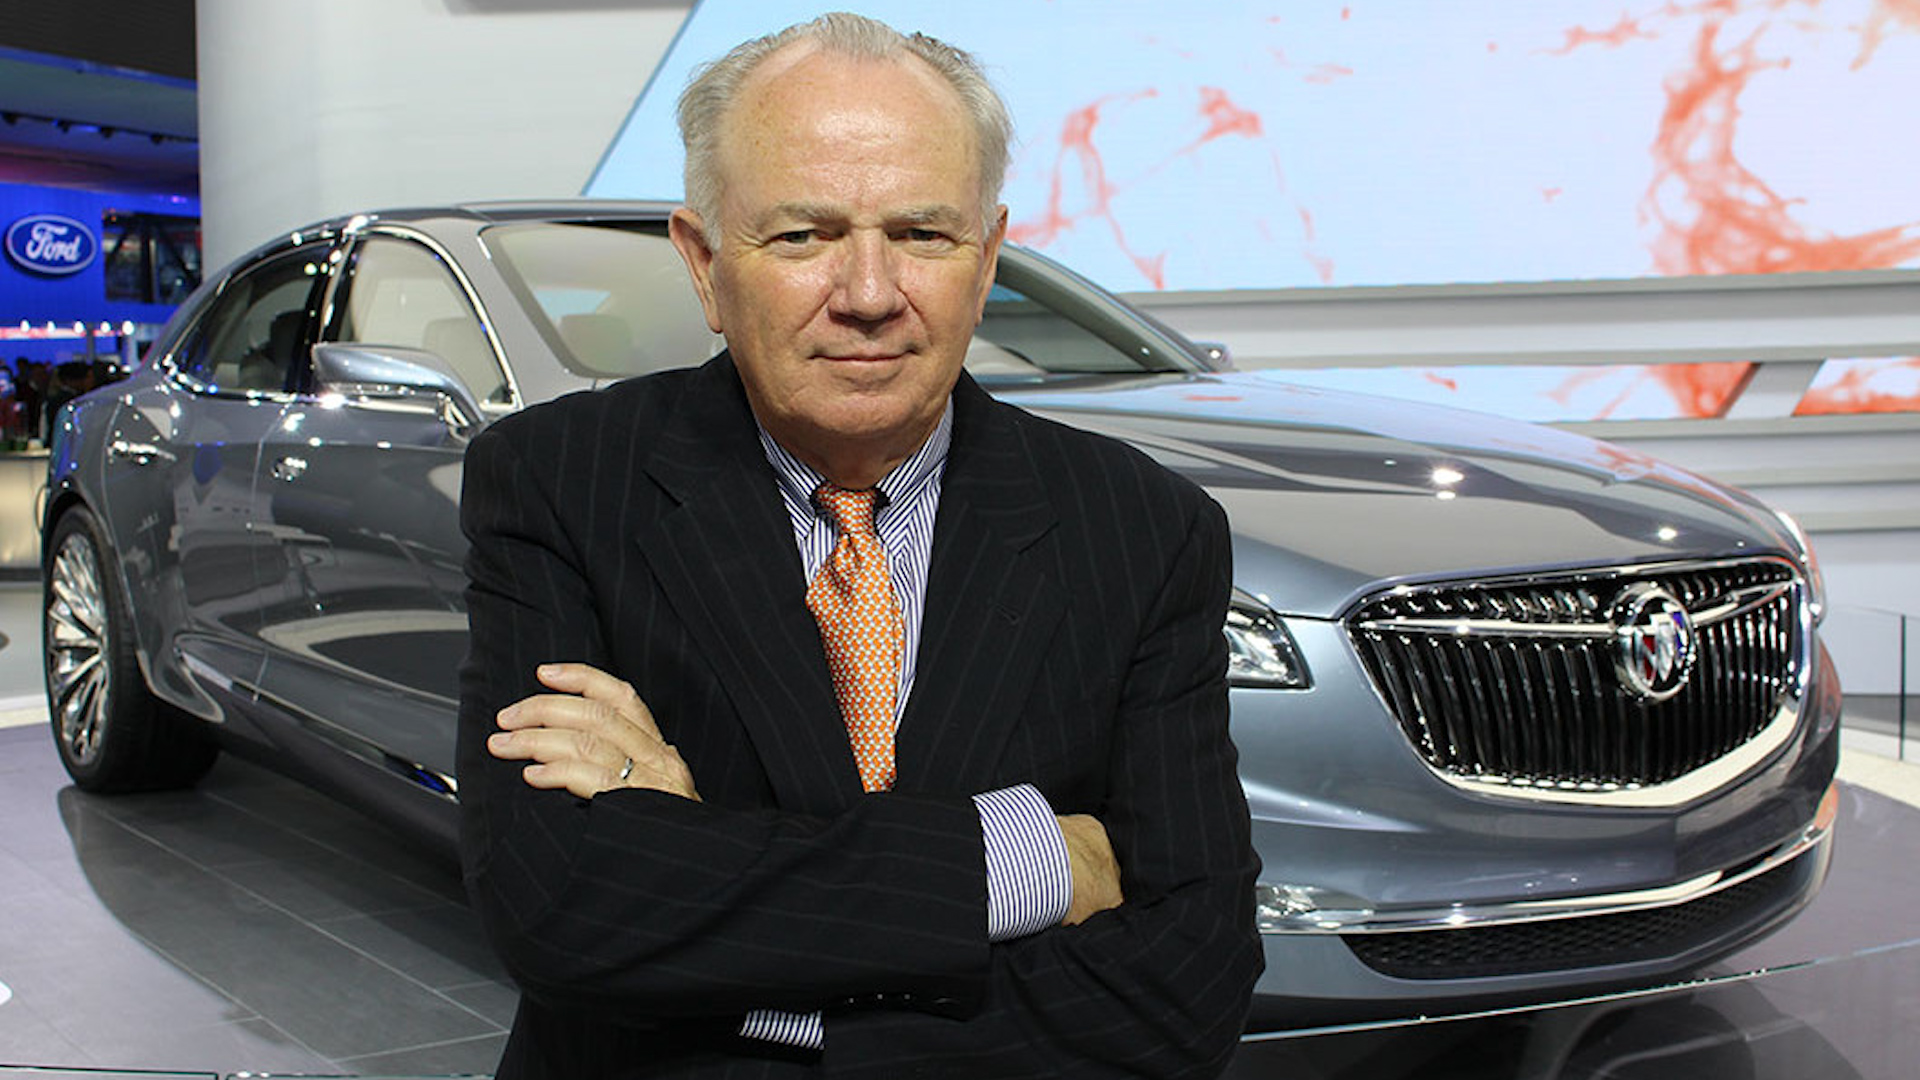 The CEO of AutoNation, Mike Jackson is stepping down after Almost 20 Years